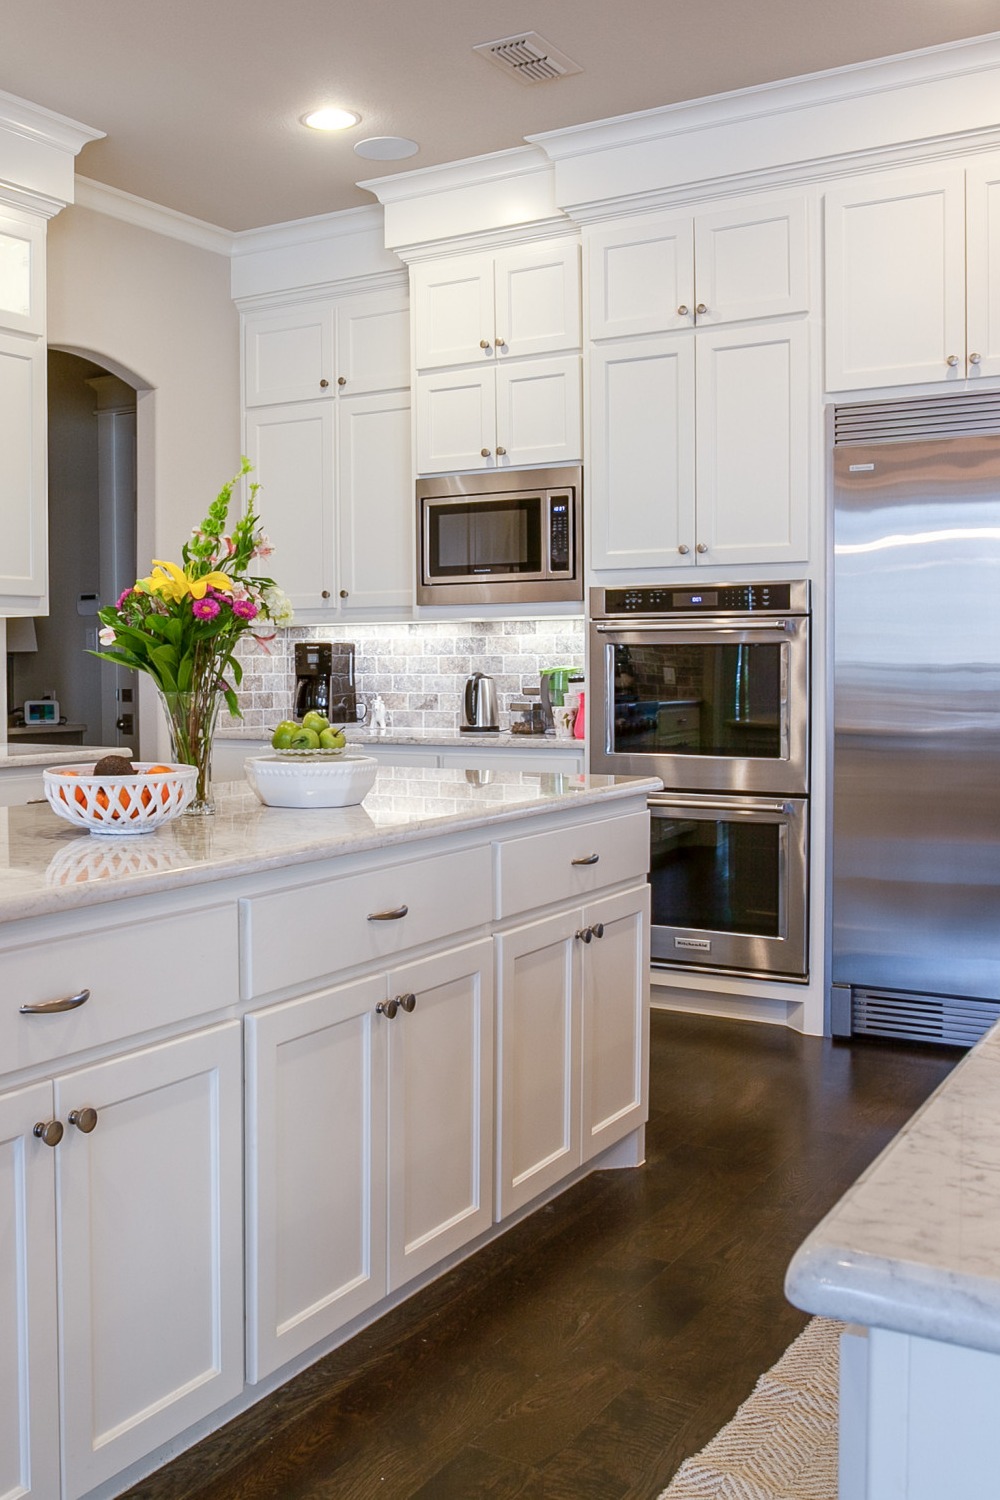 White Countertops Stainless Steel Appliances White Cabinetry Whitewashed Brick Backsplash Modern Style Space